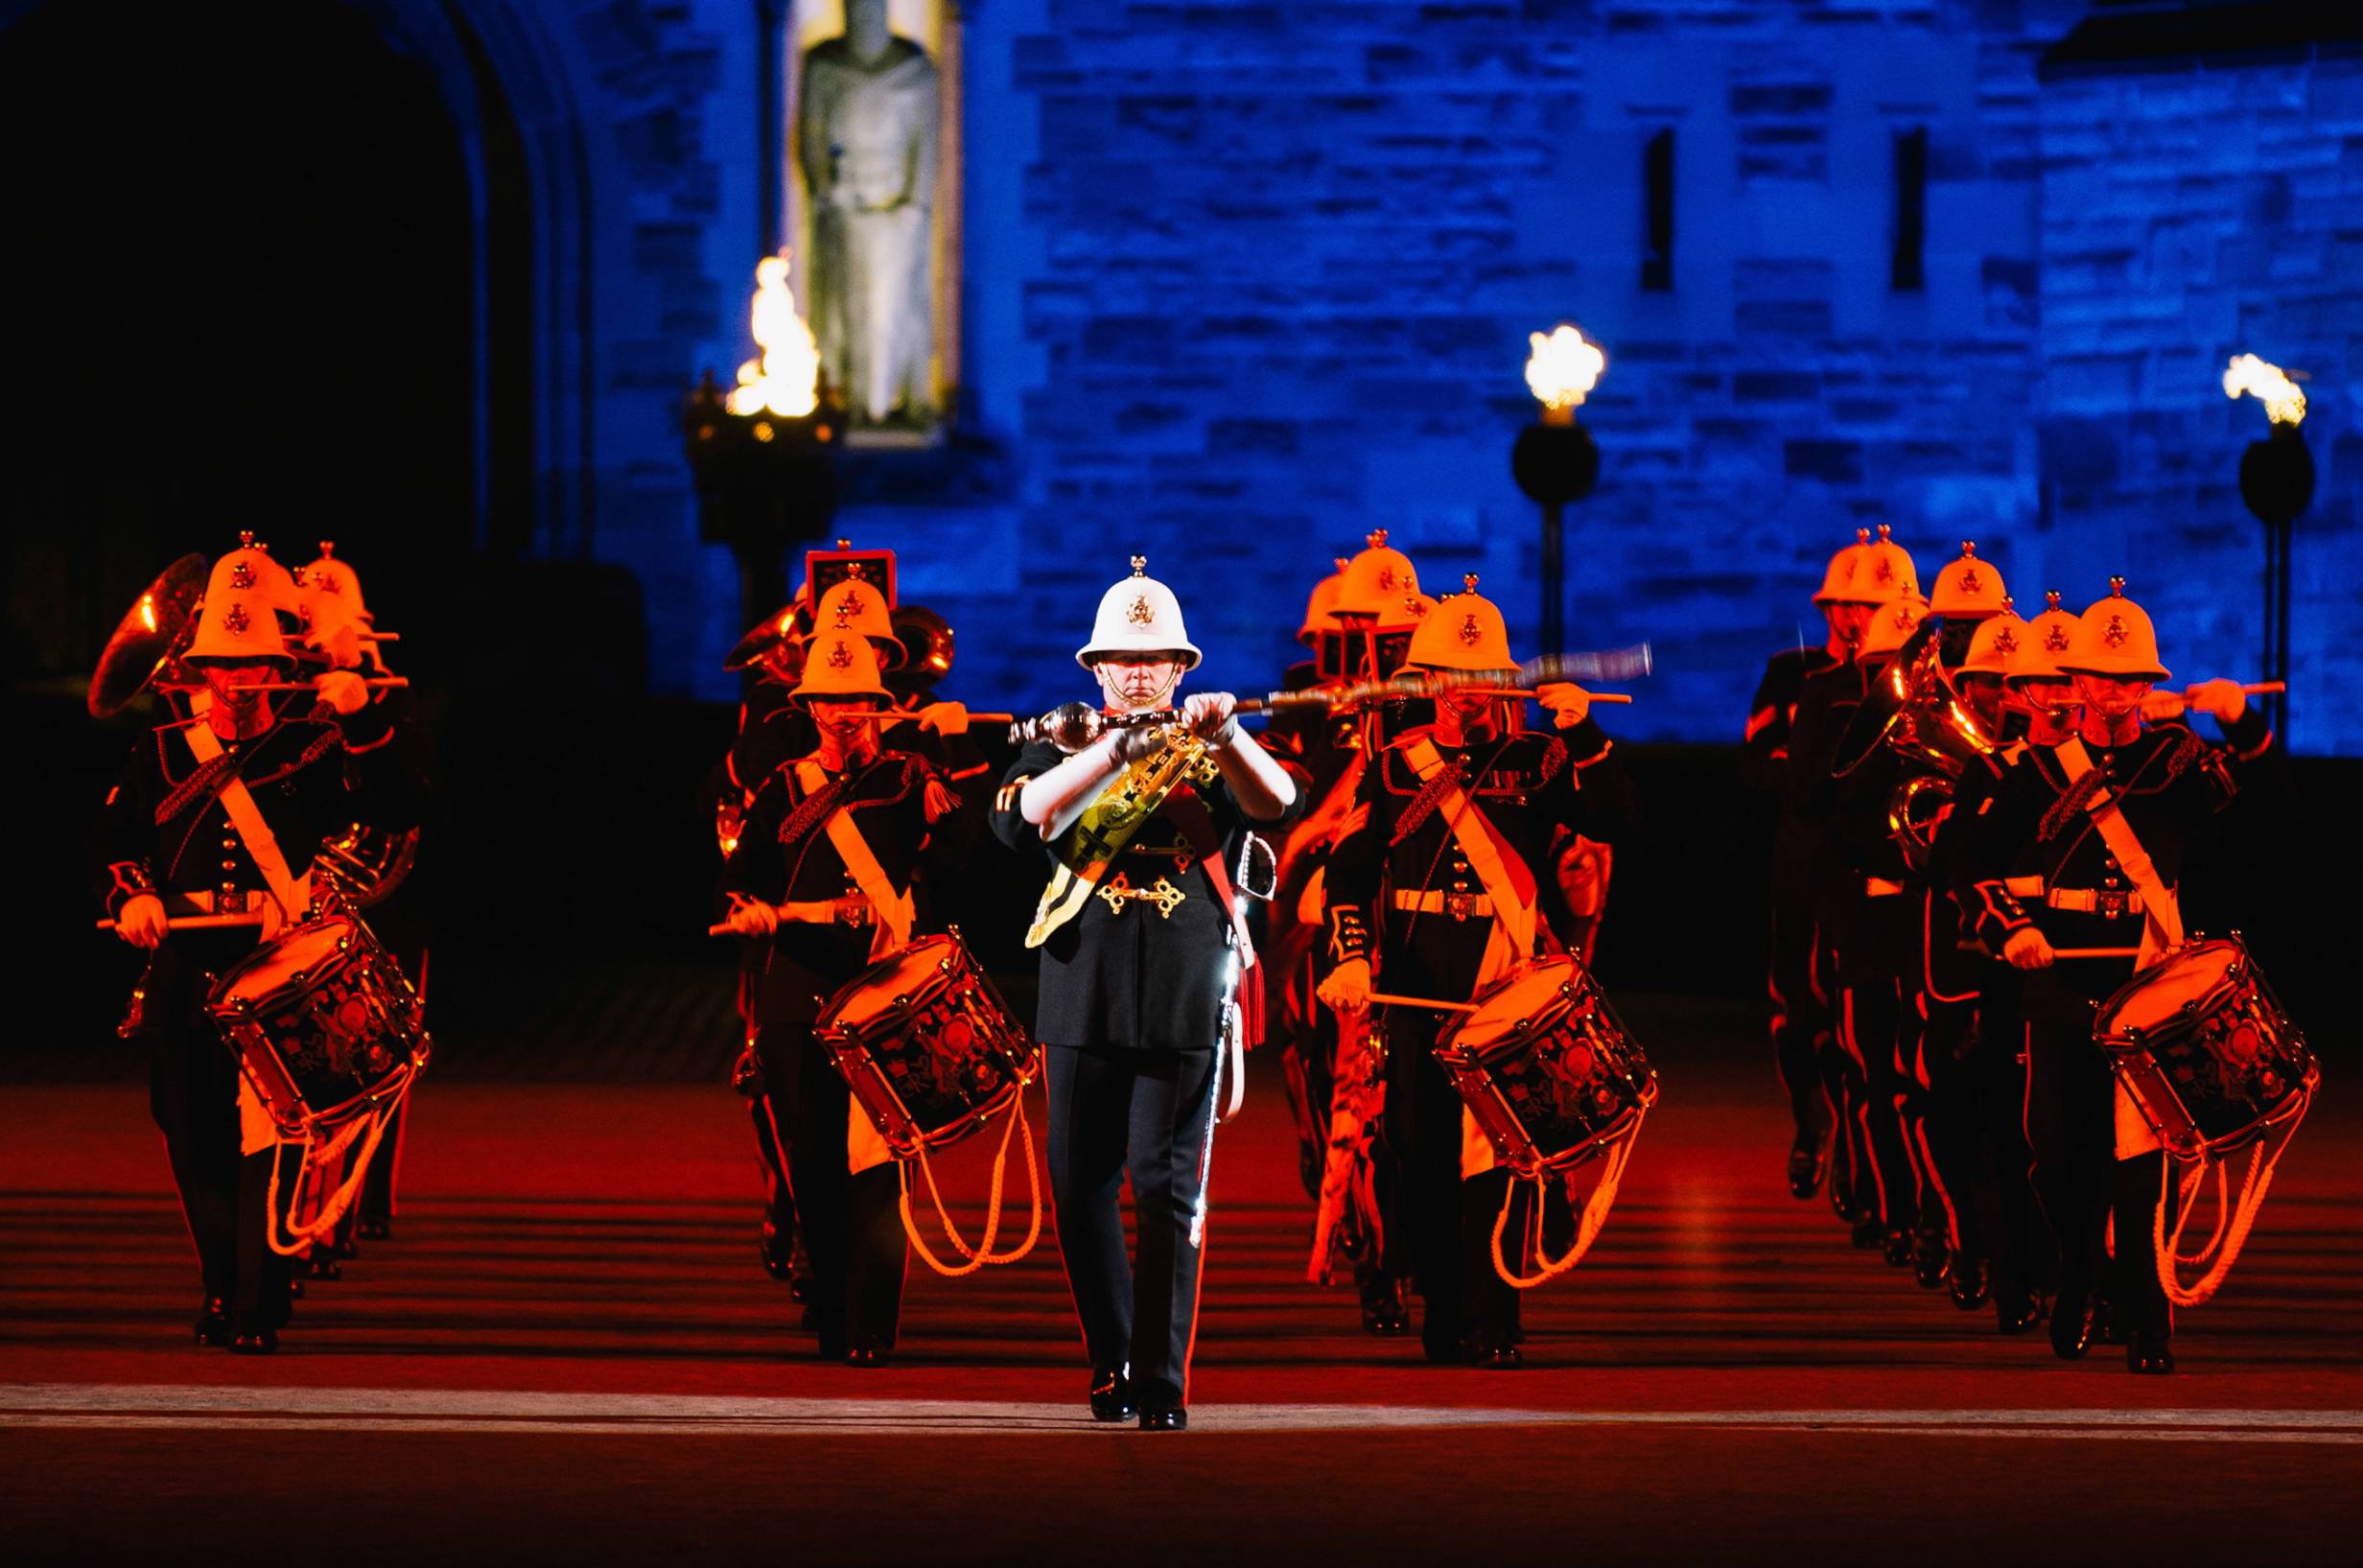 Precision and spectacle: The Bands of the Royal Marines and Scots Guards come to Krannert